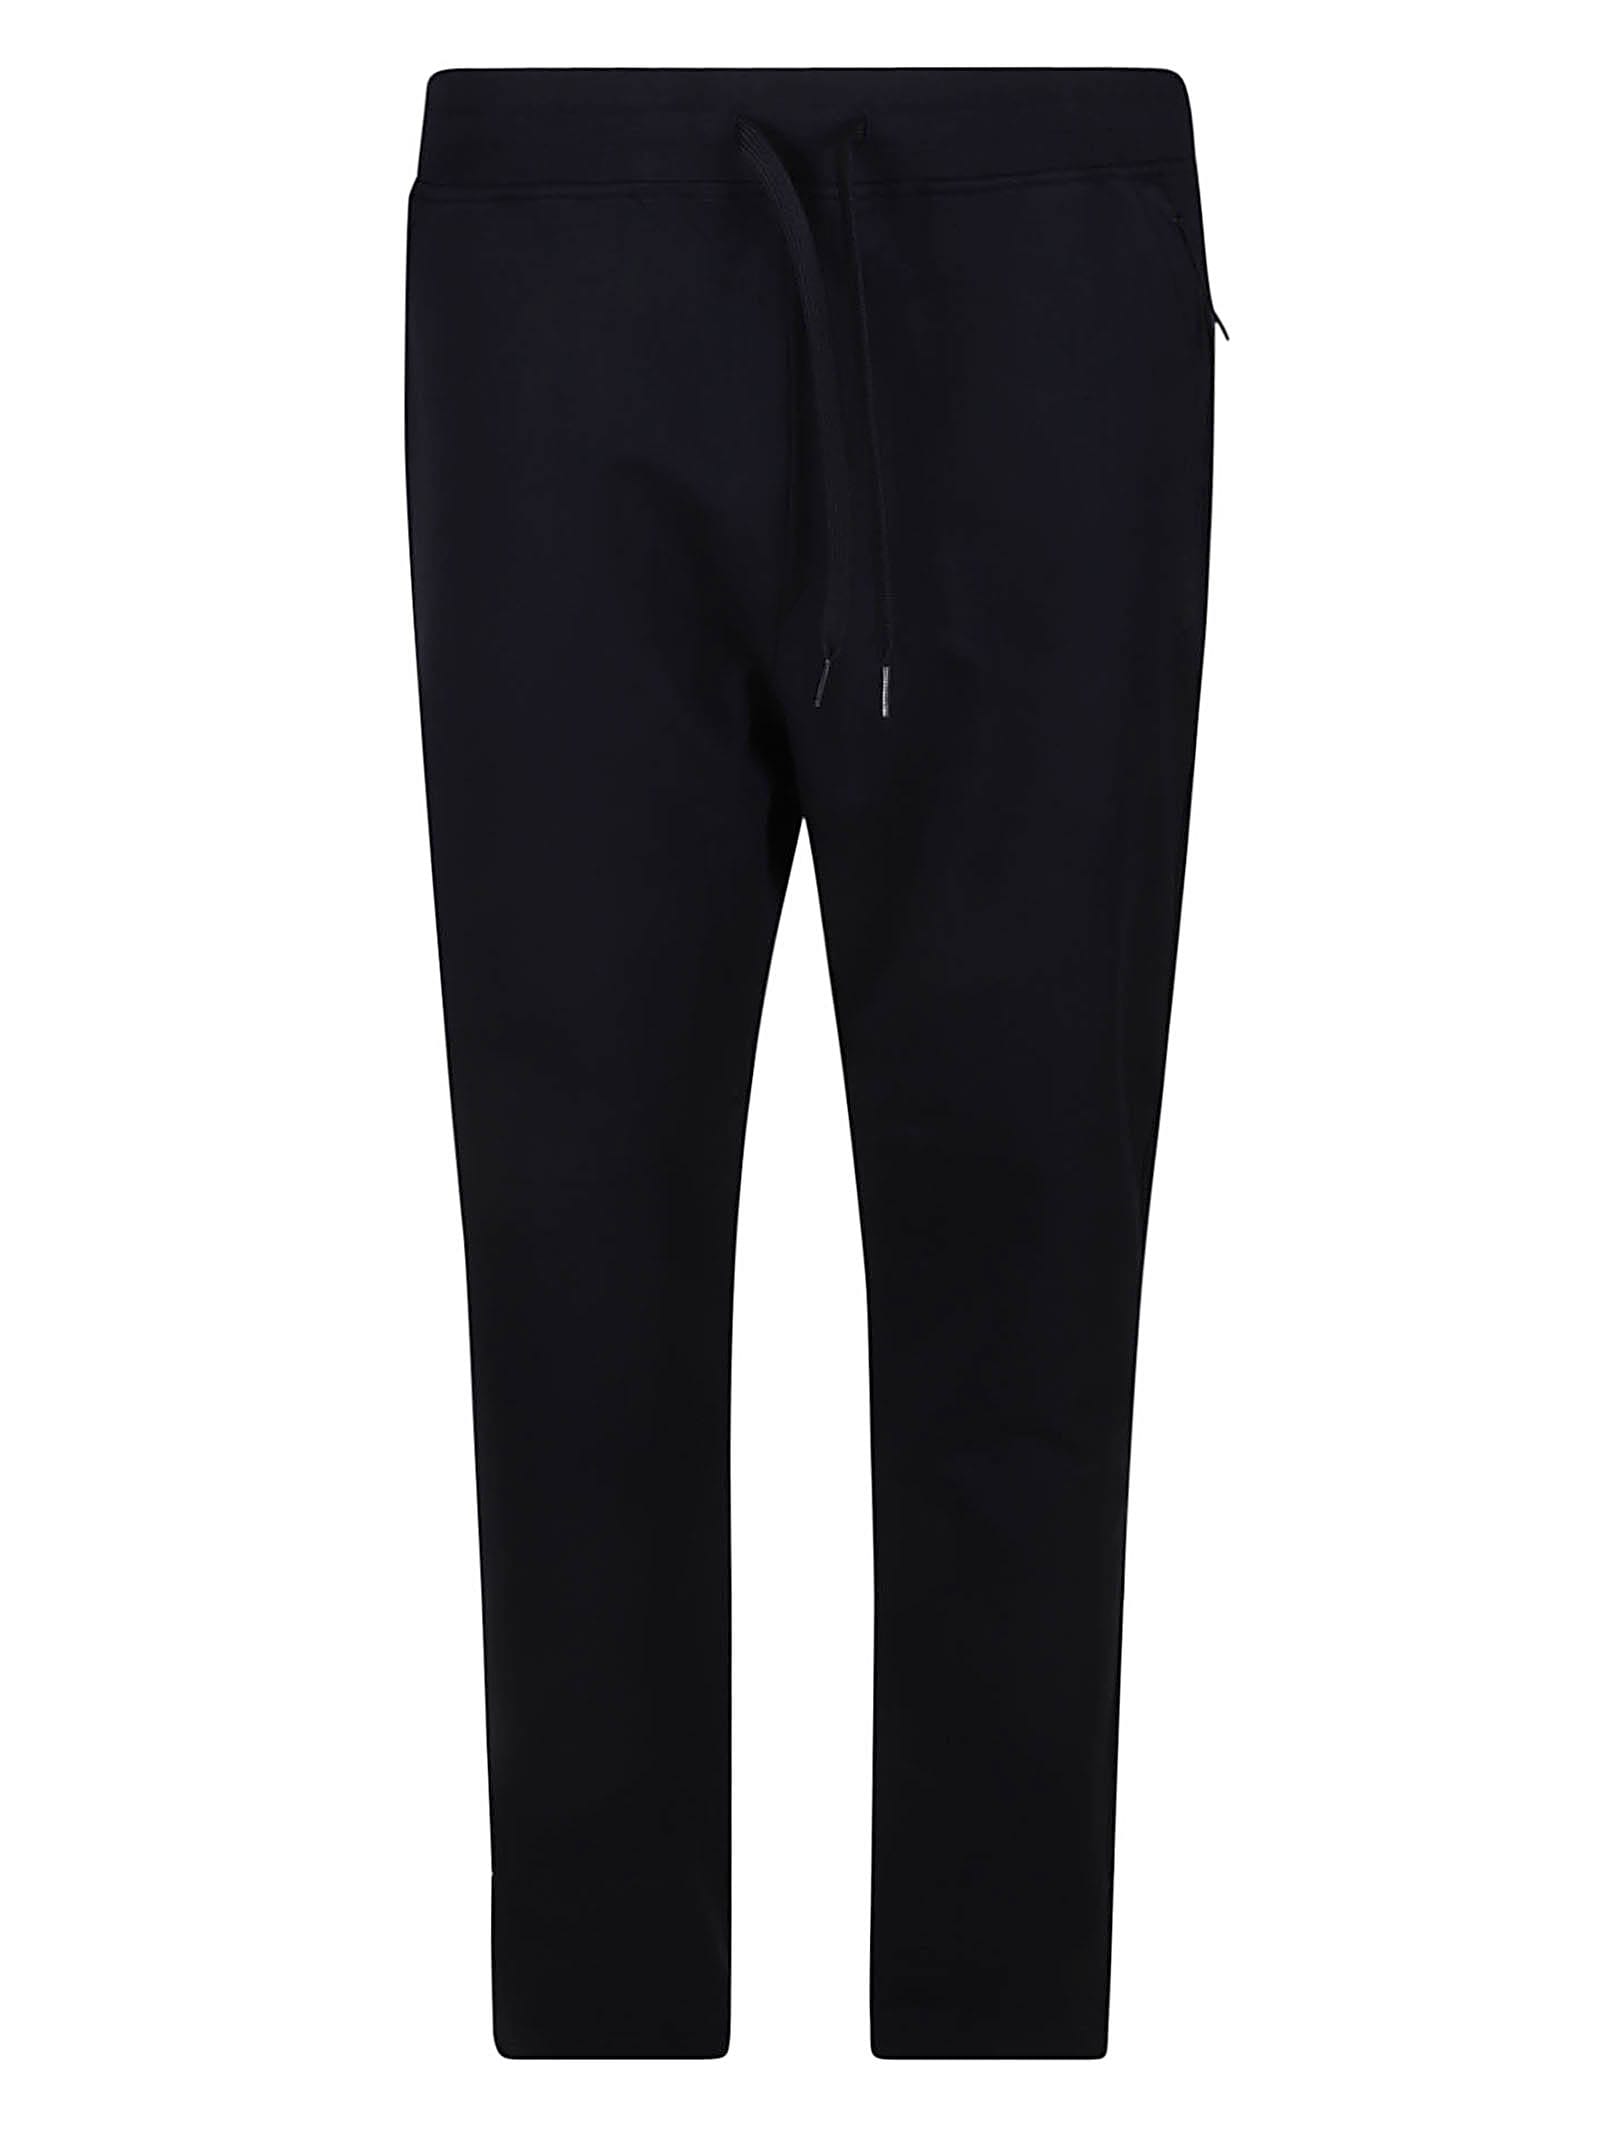 C.P. COMPANY CLASSIC LACE FITTED TRACK PANTS